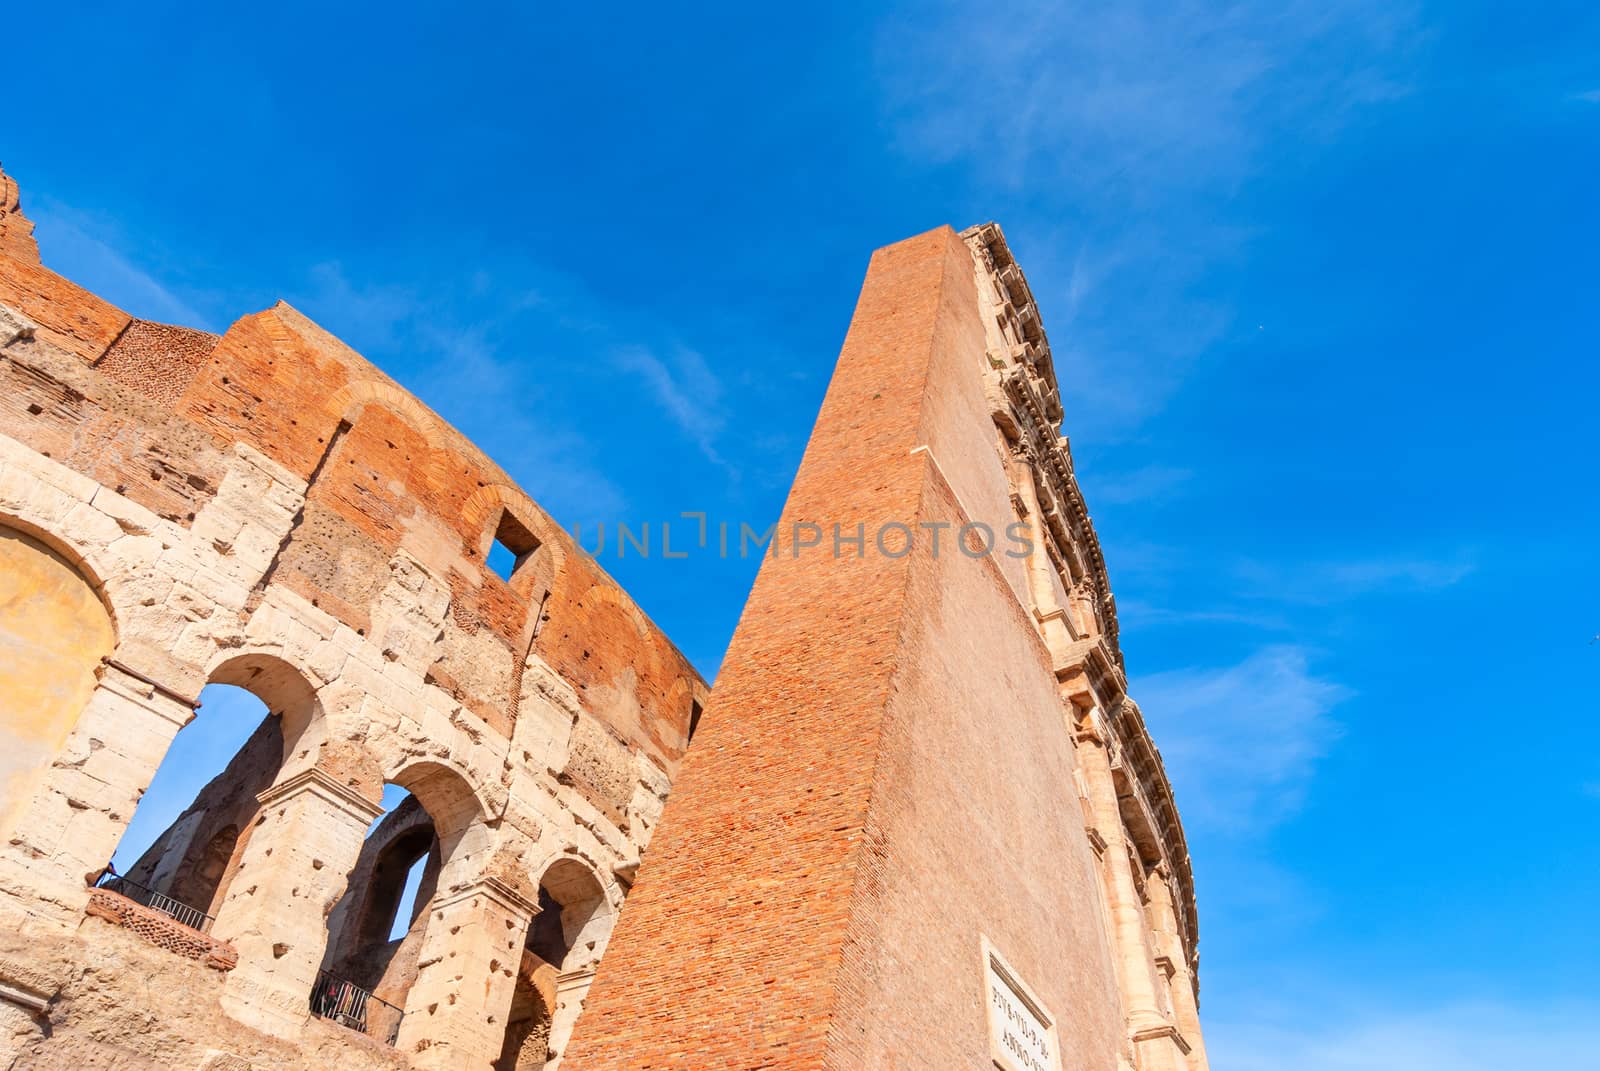 Colosseum in Rome, Italy. Ancient Roman Colosseum is one of the main tourist attractions in Europe. People visit the famous Colosseum in Roma center.